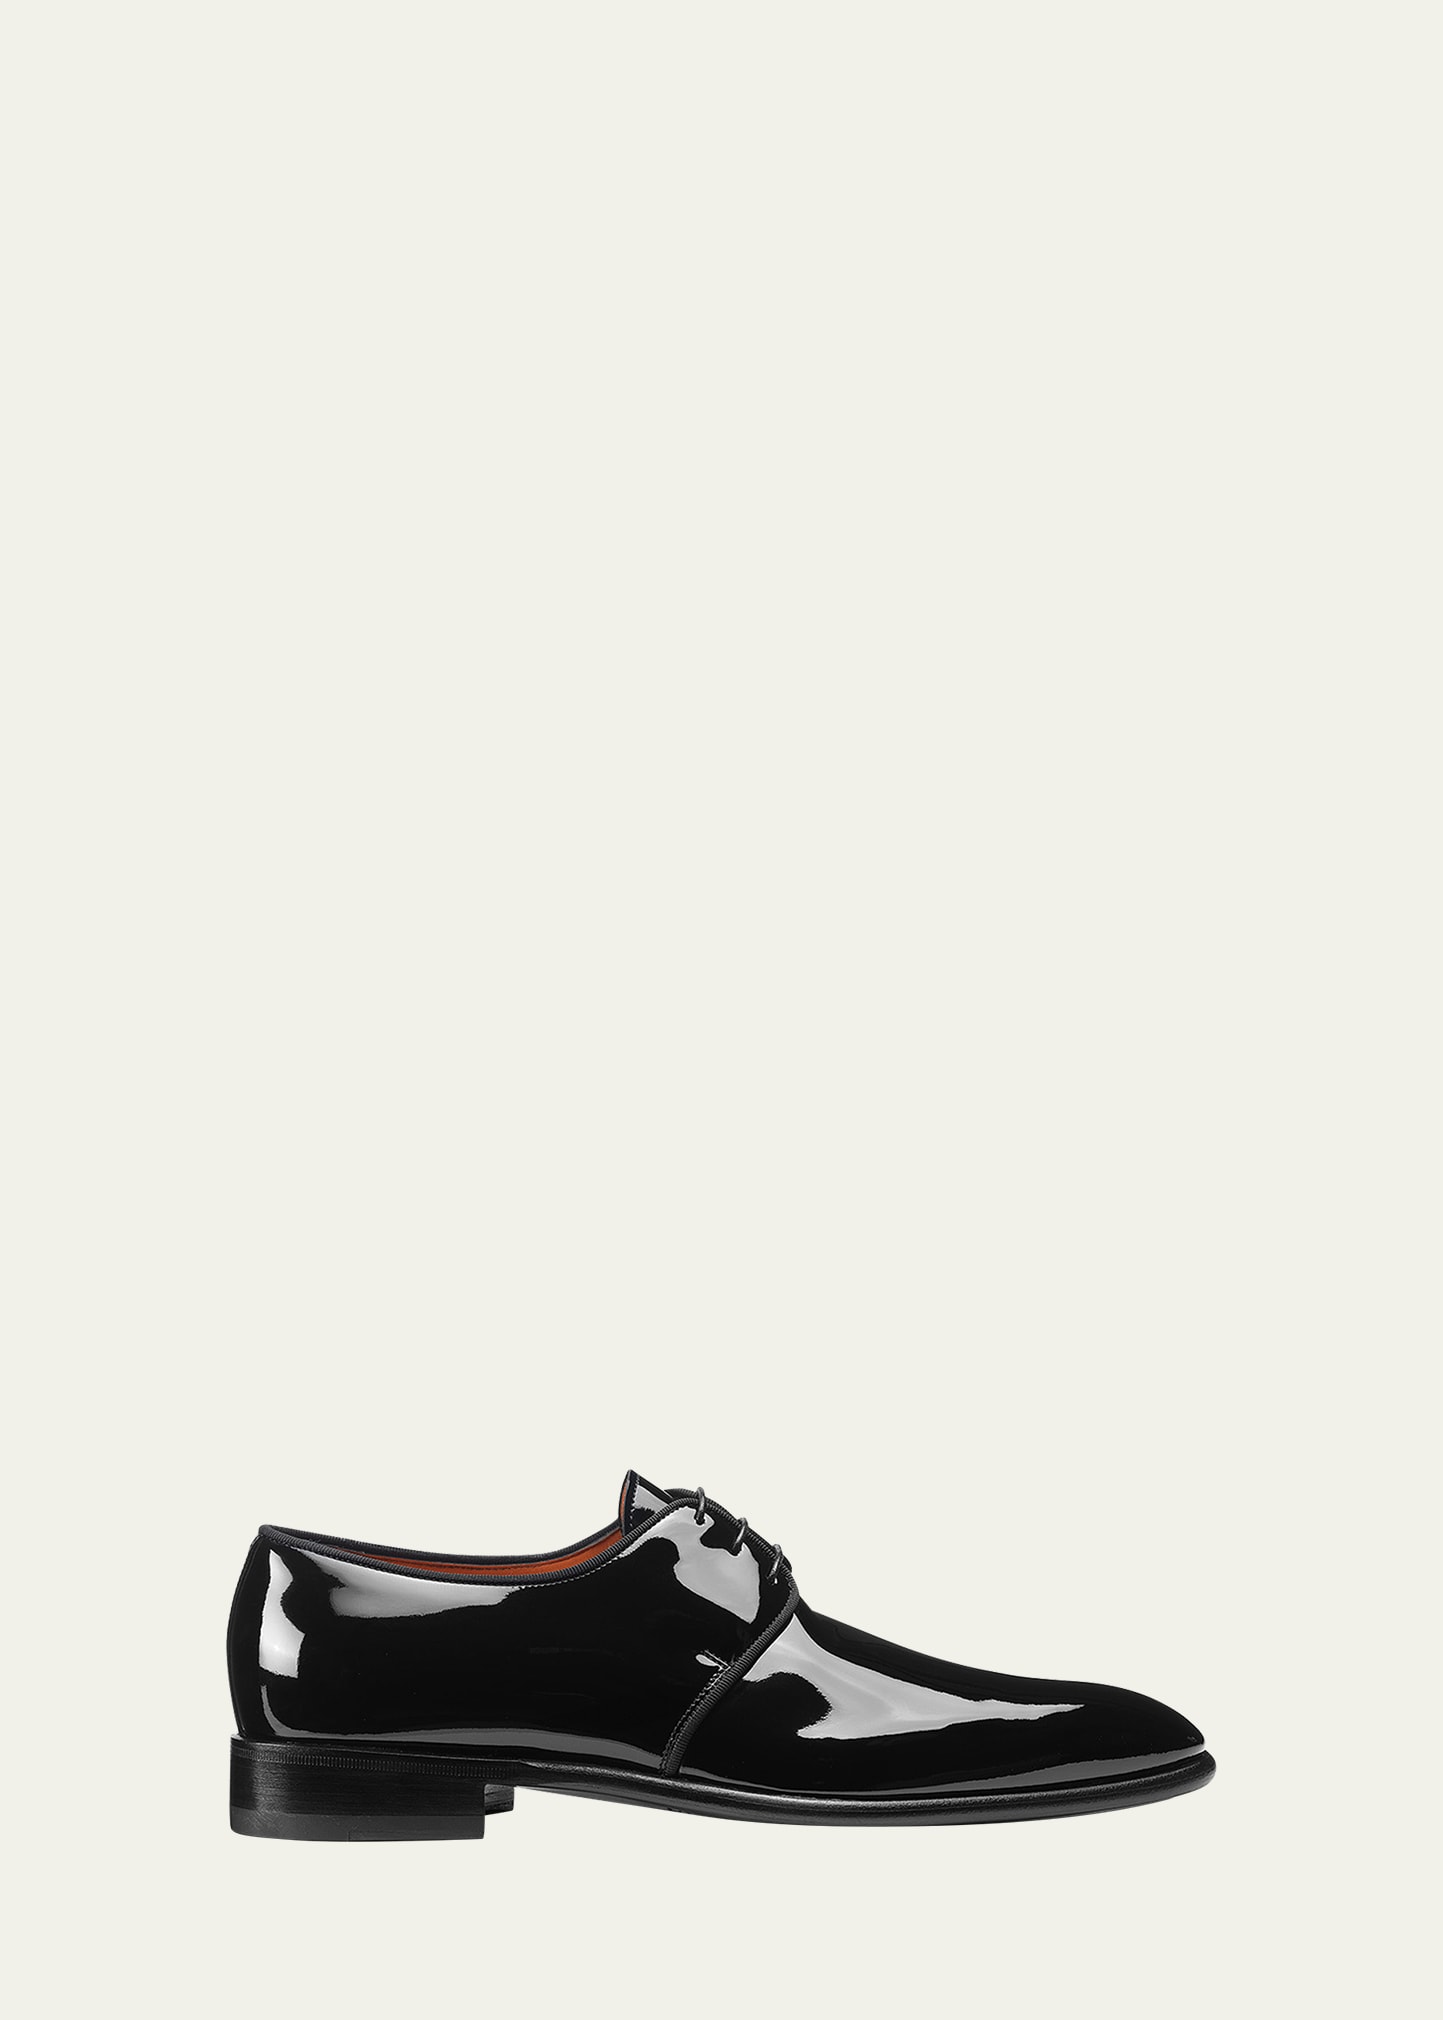 Men's Isogram Patent Leather Derby Shoes